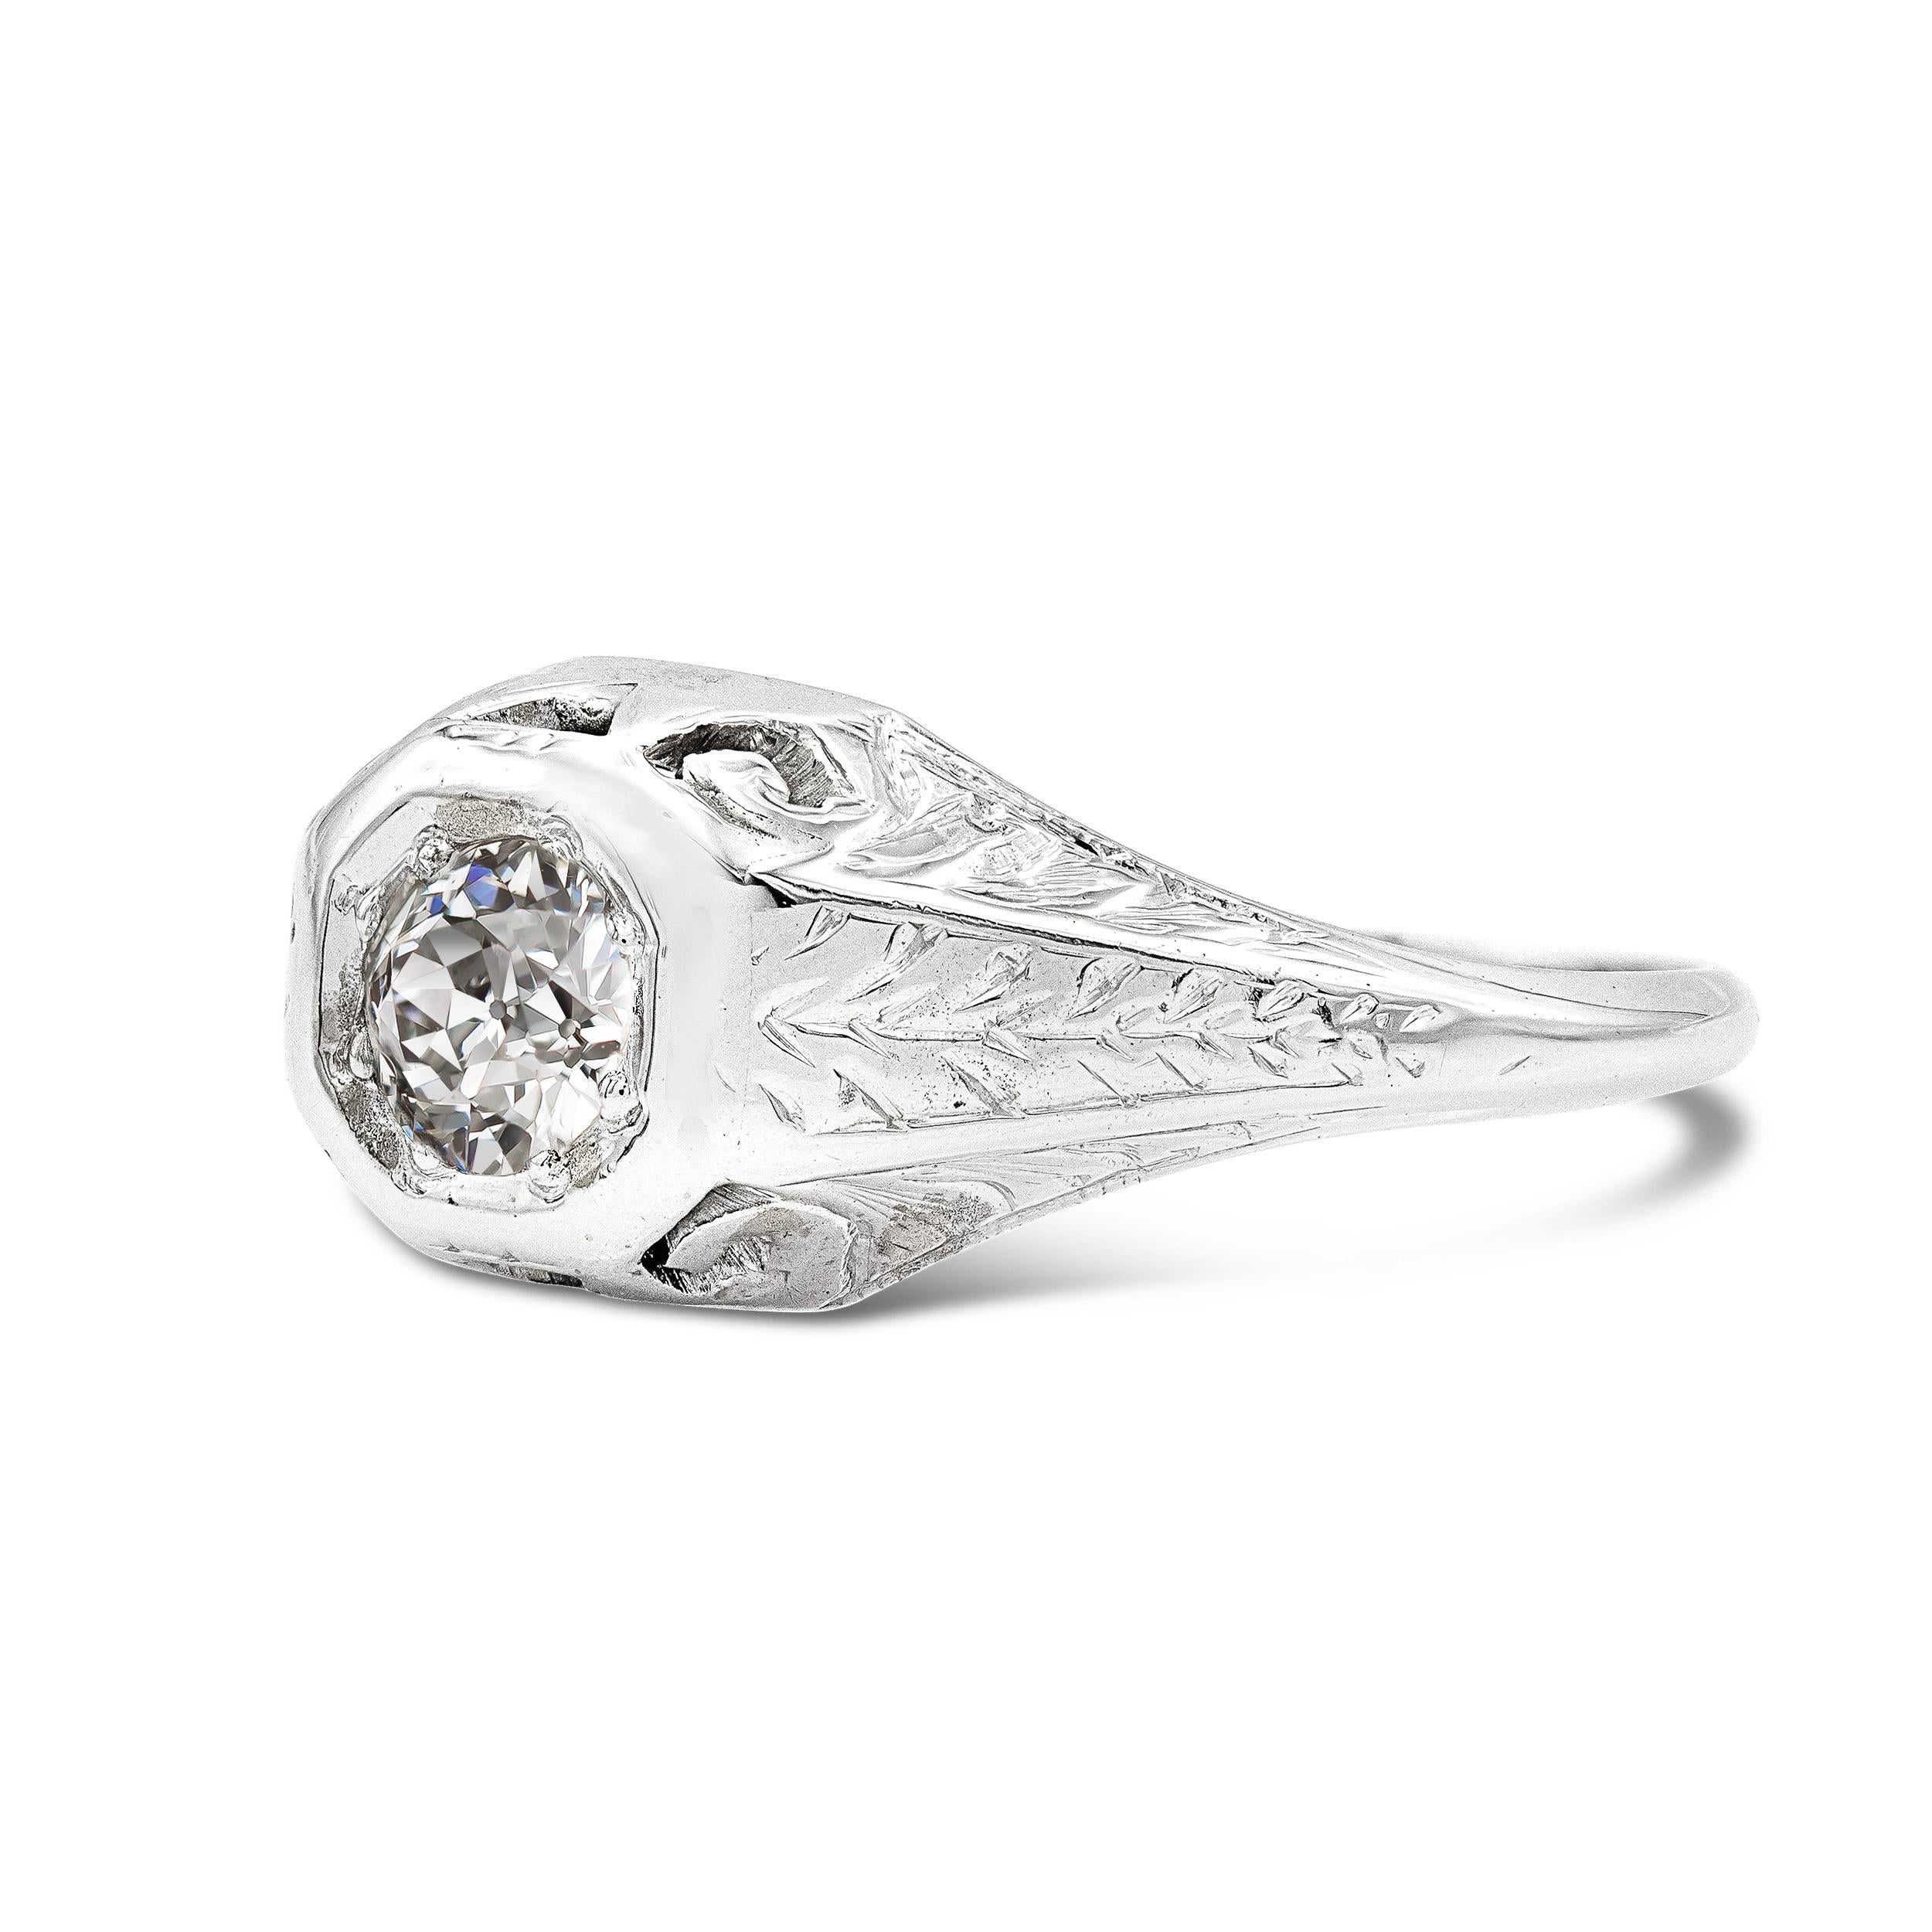 We love a solitaire setting with some added intrigue and this art deco engagement ring does not disappoint. The scintillating center shines at all angles and the hand engraved band is the ideal host for an antique diamond.

Diamond Details:
Primary